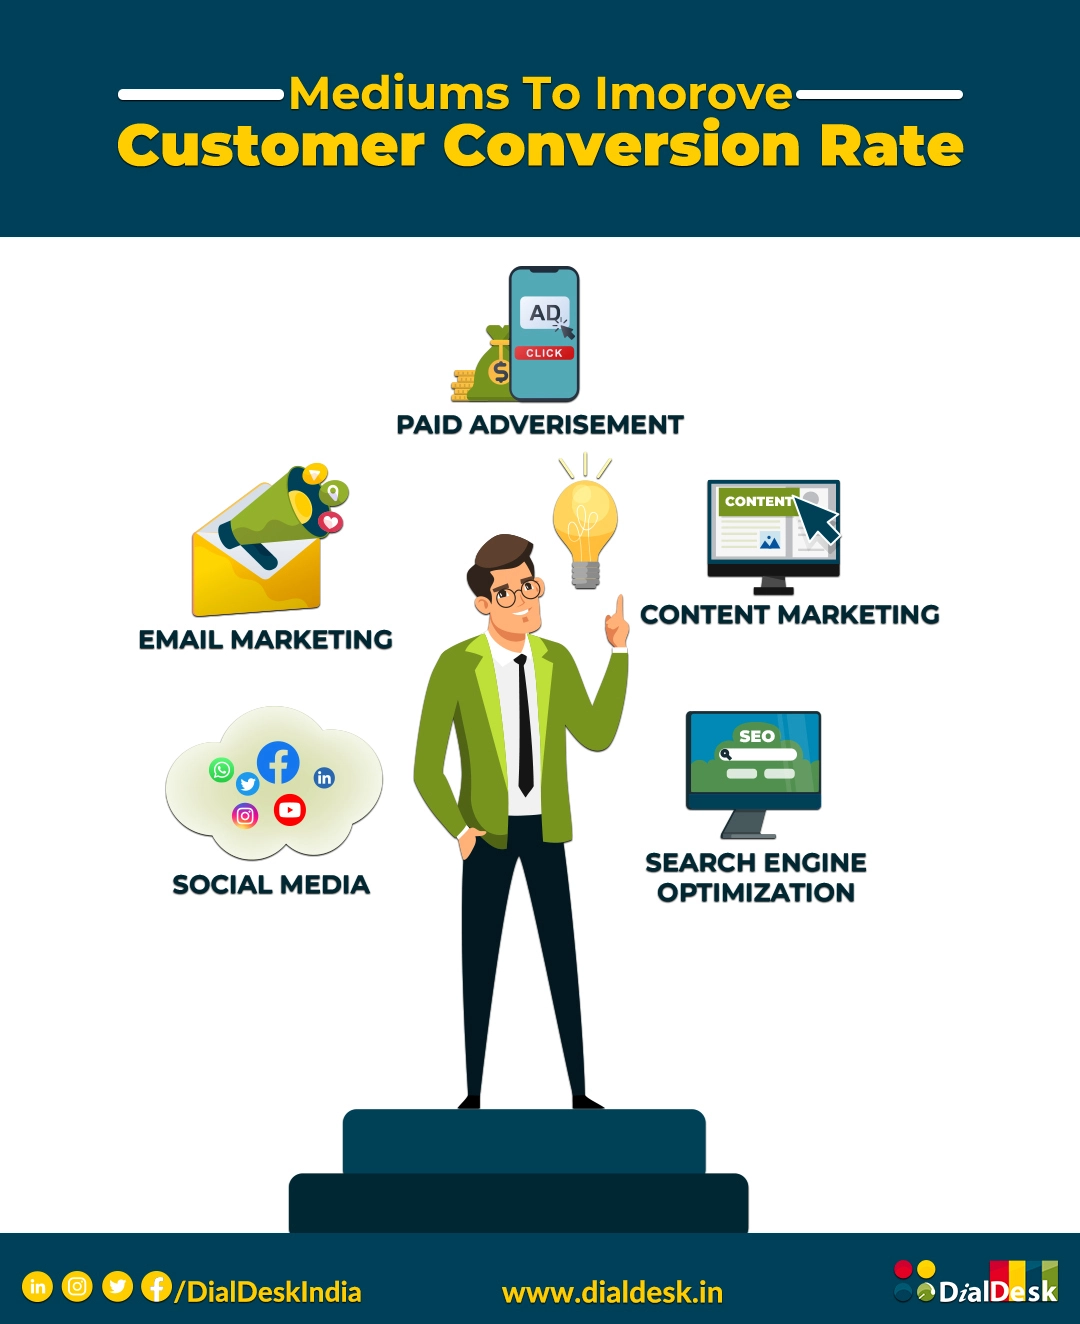 How to improve Customer Conversion Rate?